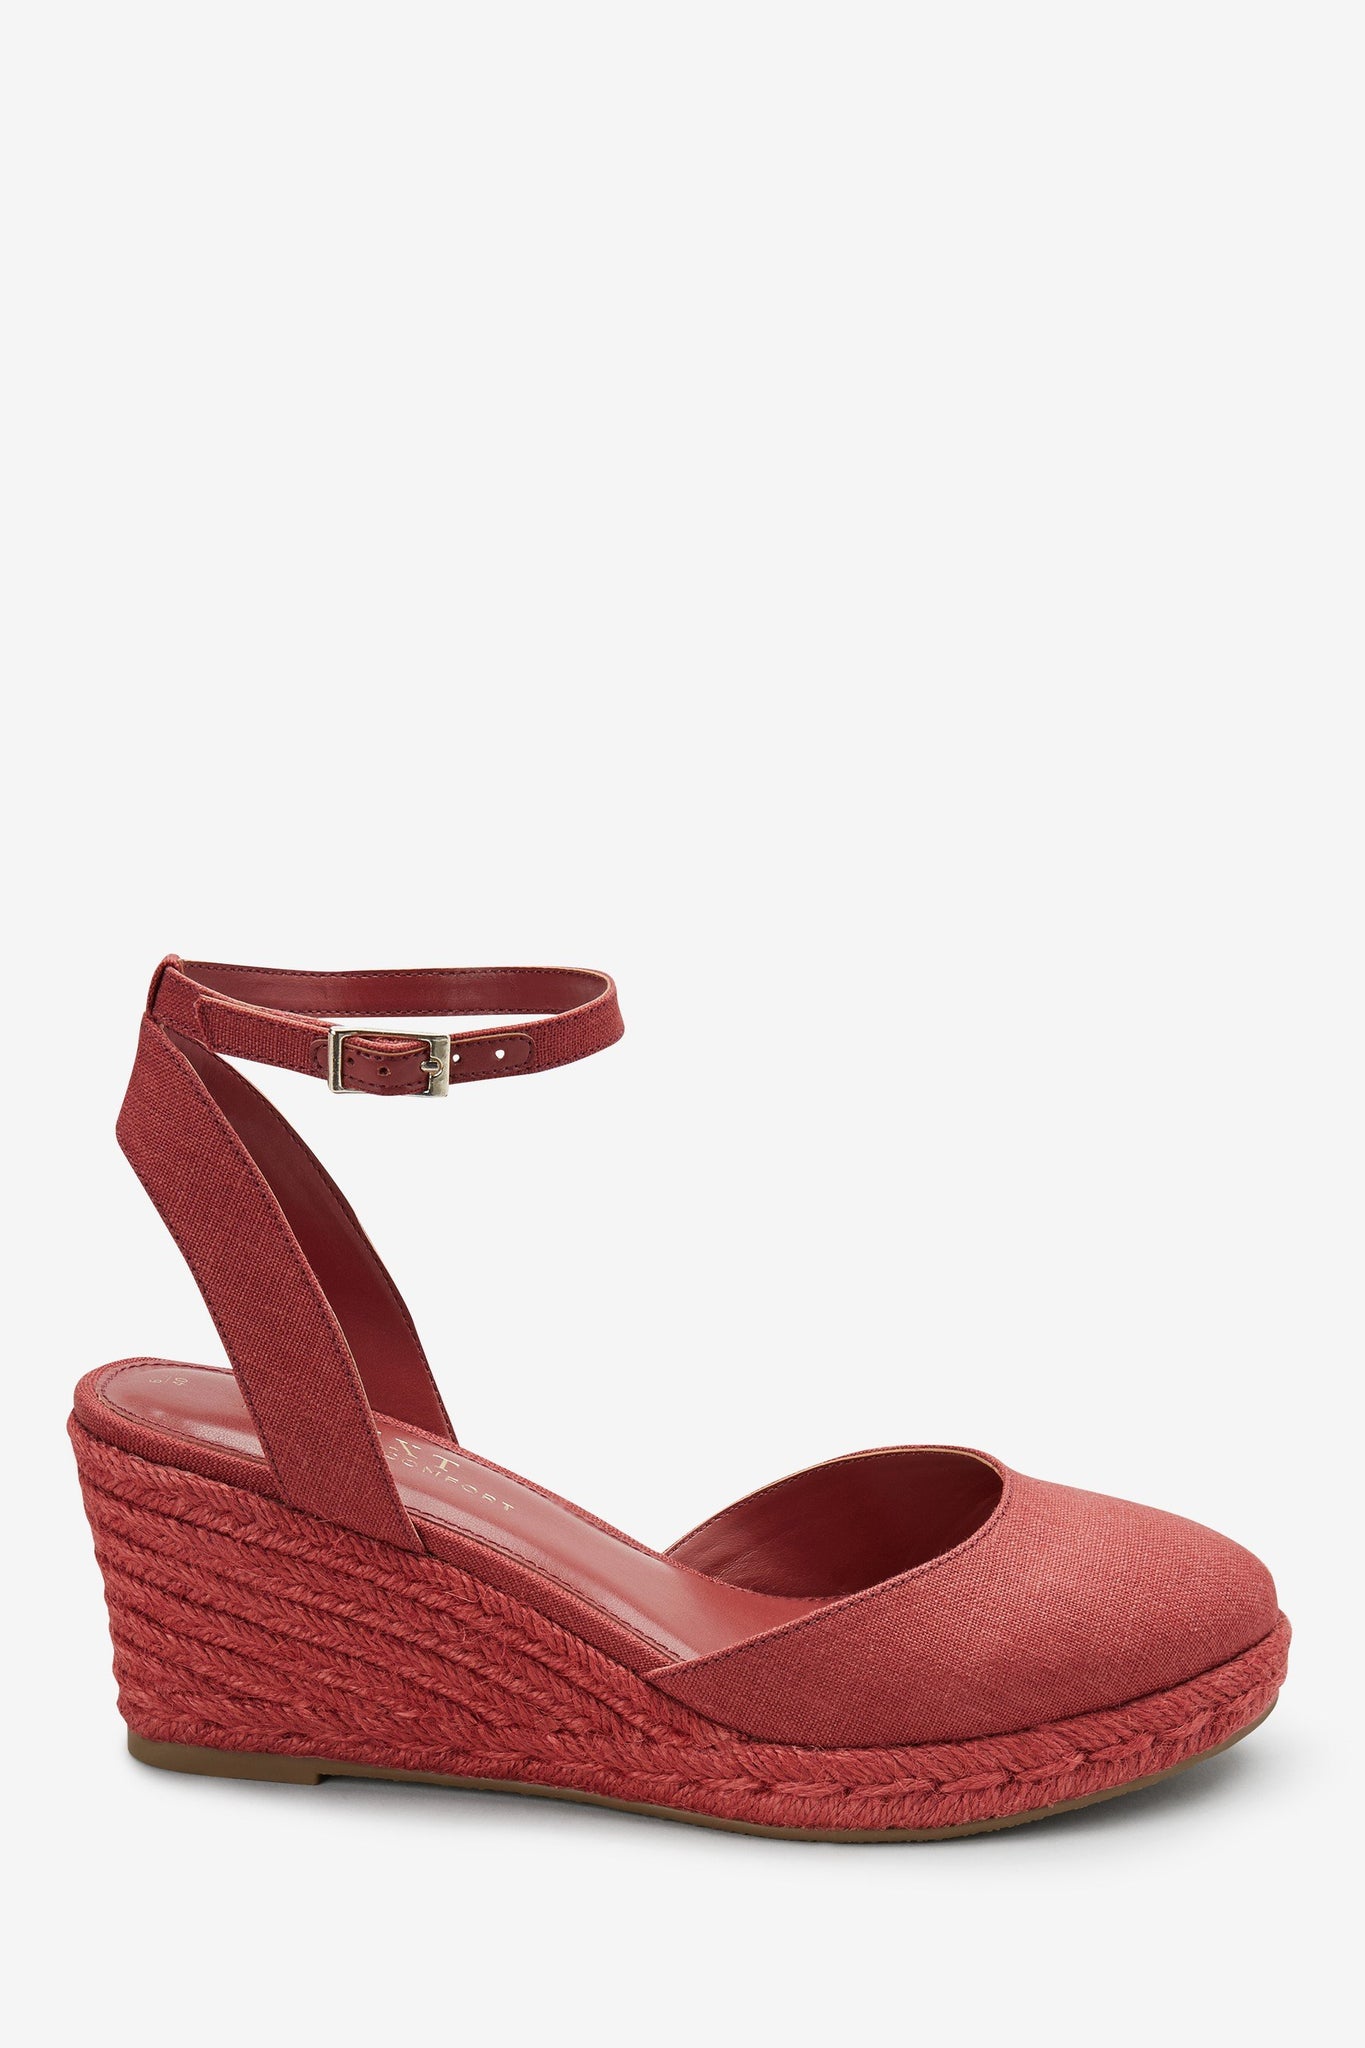 Next Rose Two Part Womens Wedges - Stockpoint Apparel Outlet